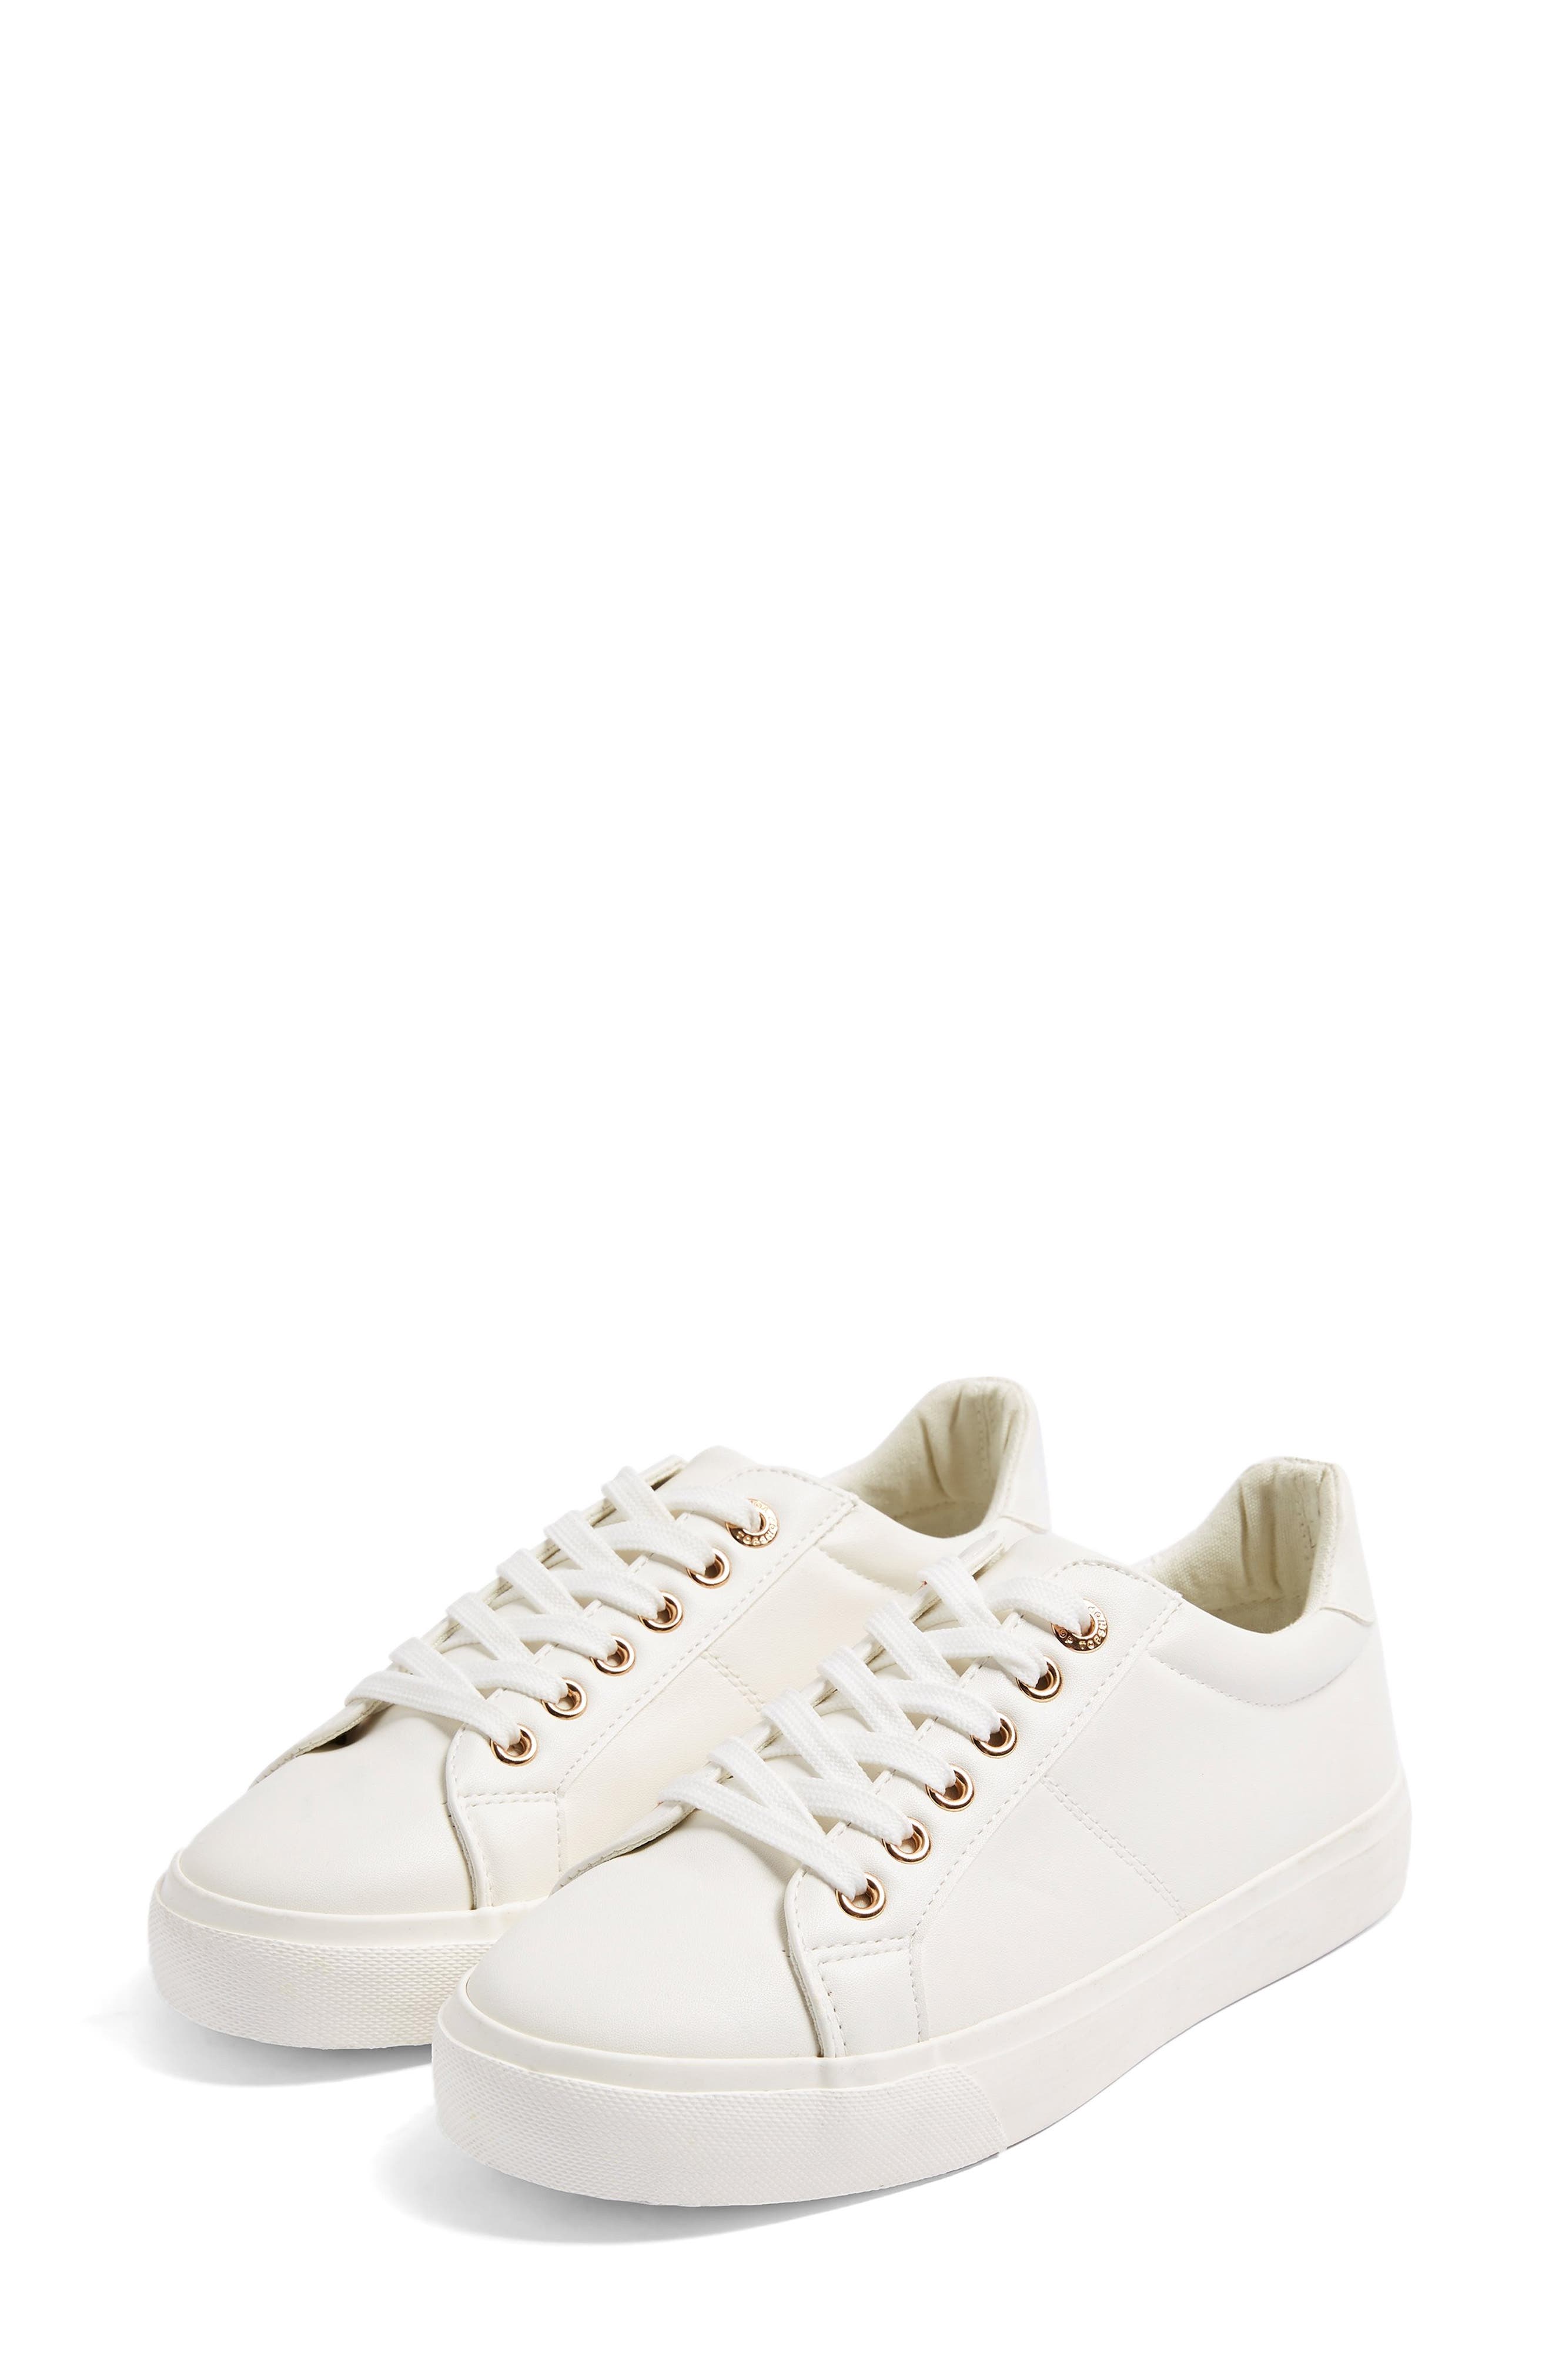 Women's White Topshop Shoes | Nordstrom